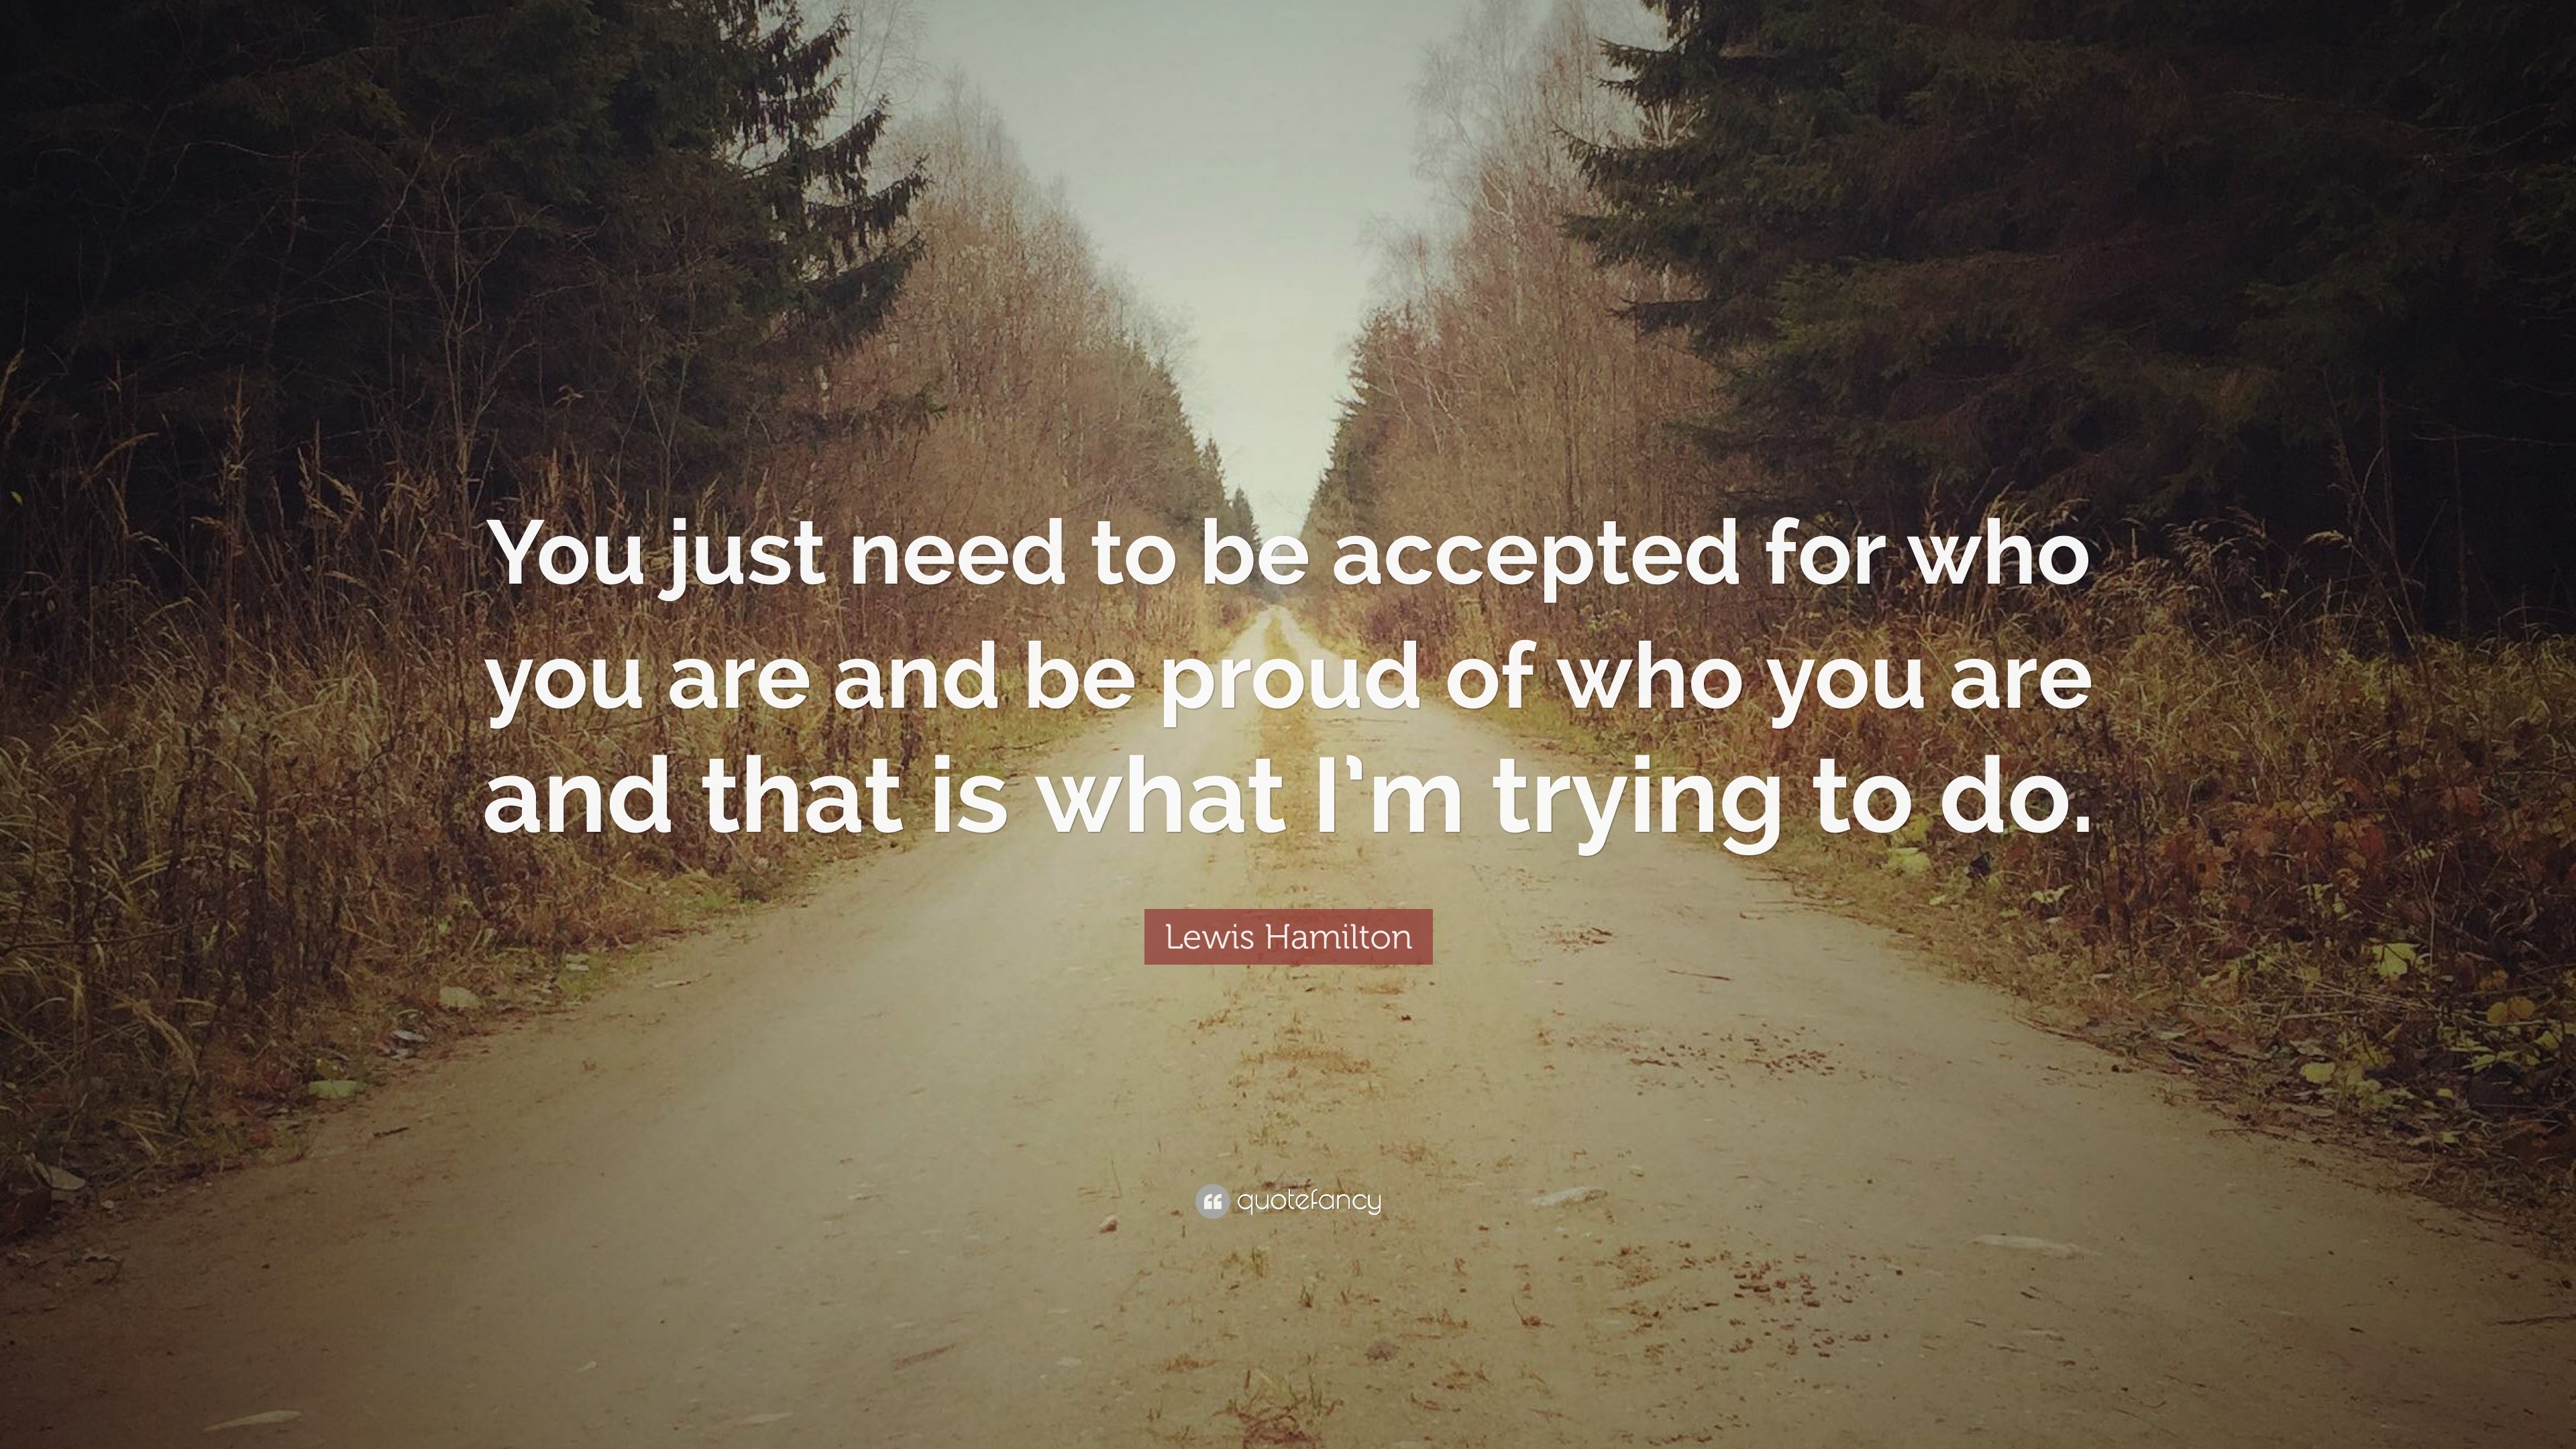 Lewis Hamilton Quote: “You just need to be accepted for who you are and ...